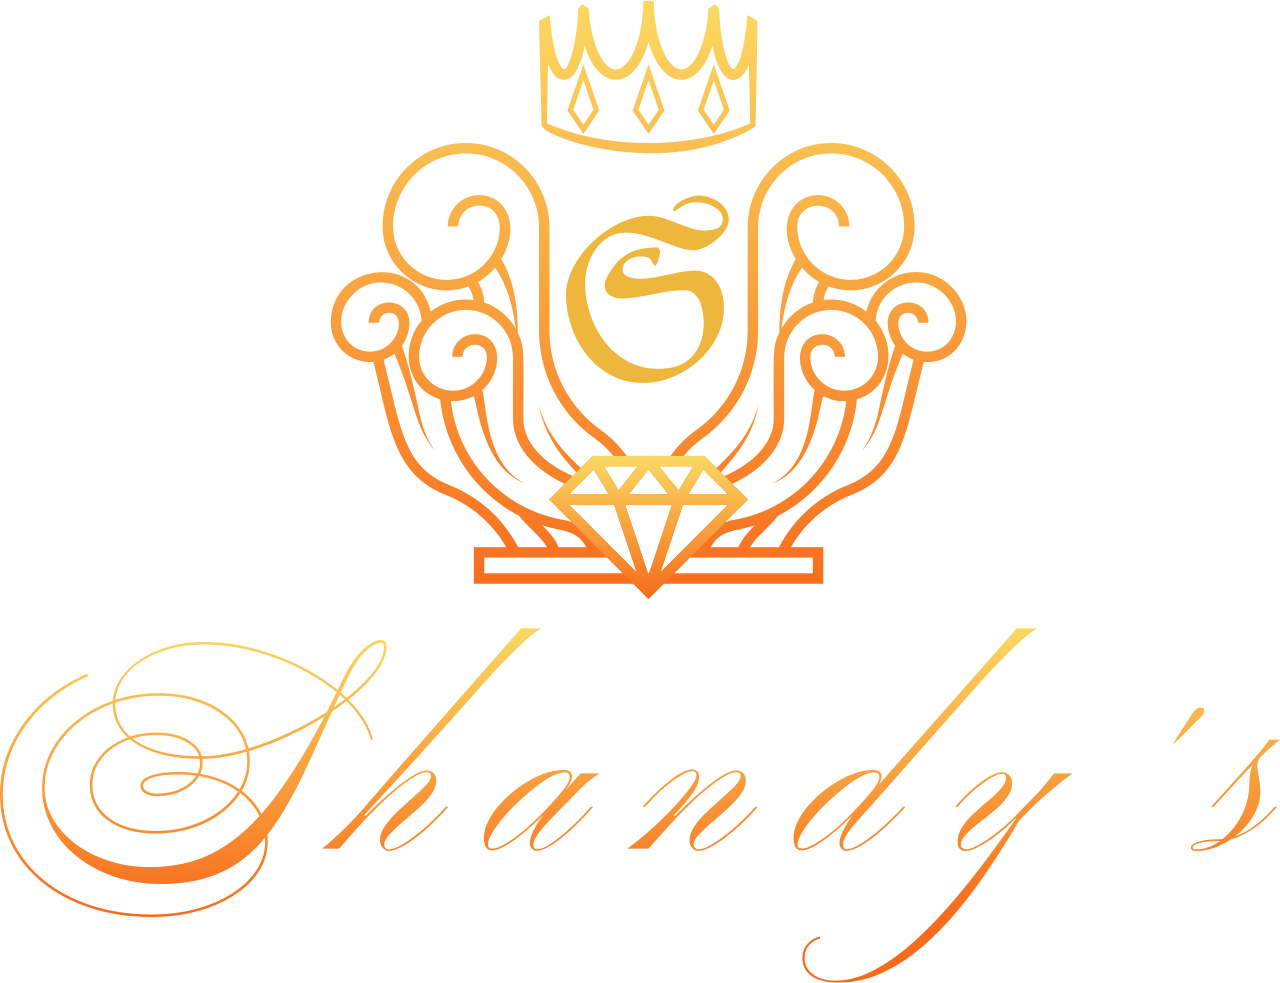 Shandy's's web page